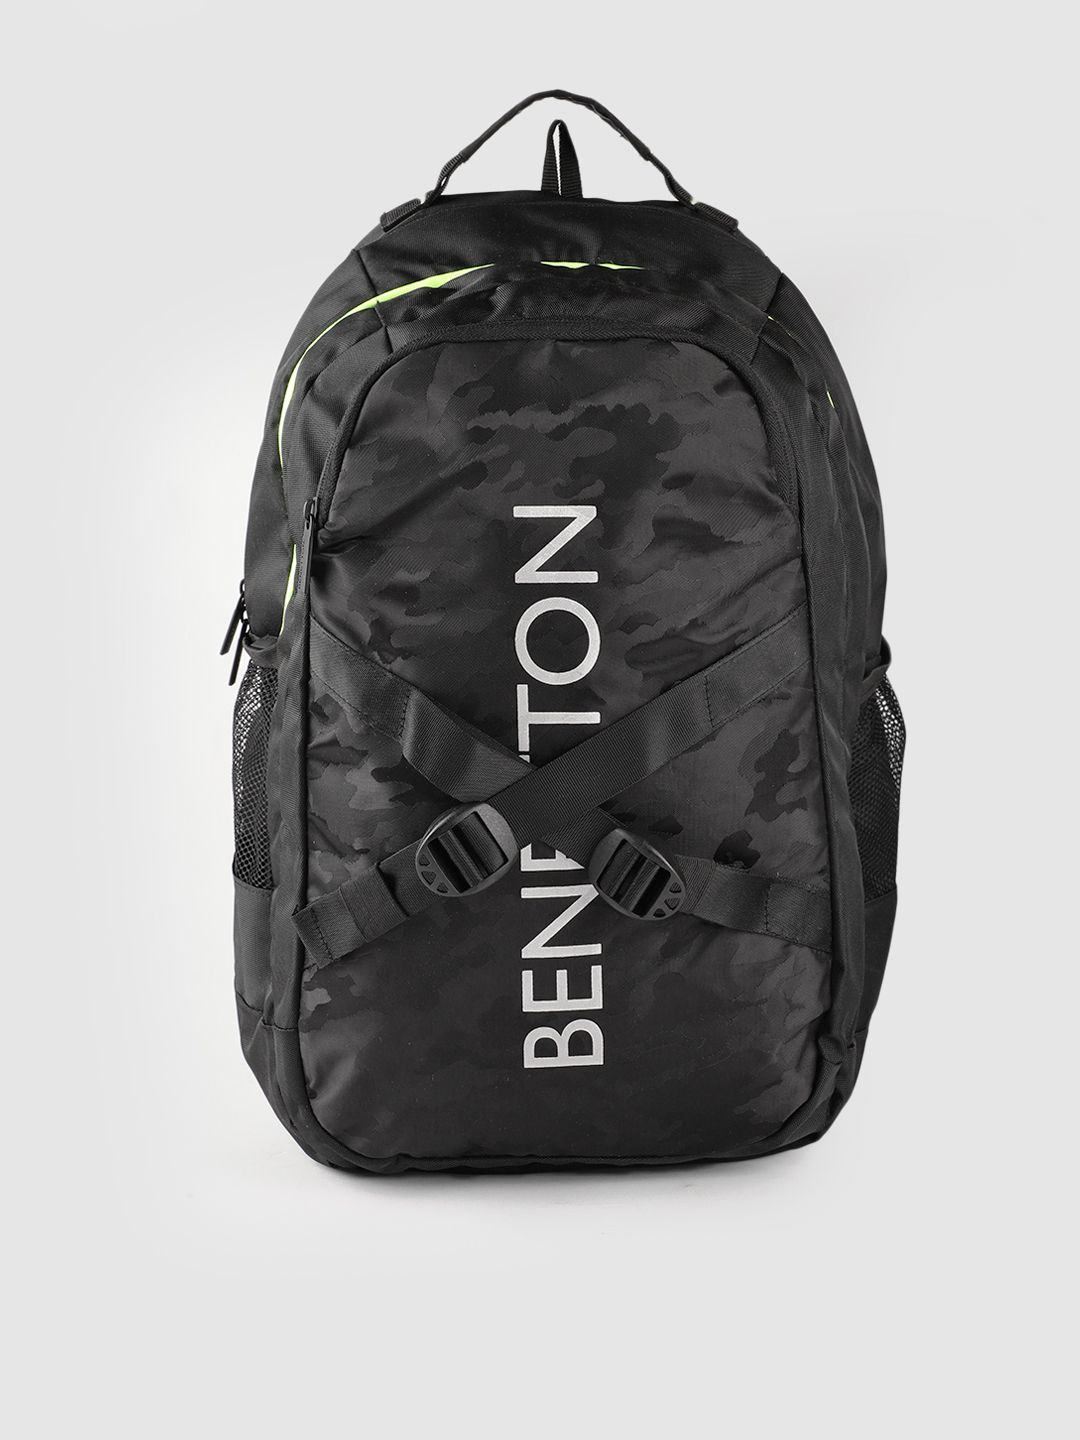 United Colors of Benetton Unisex Black Camouflage Pattern 15 Inch Laptop Backpack Price in India